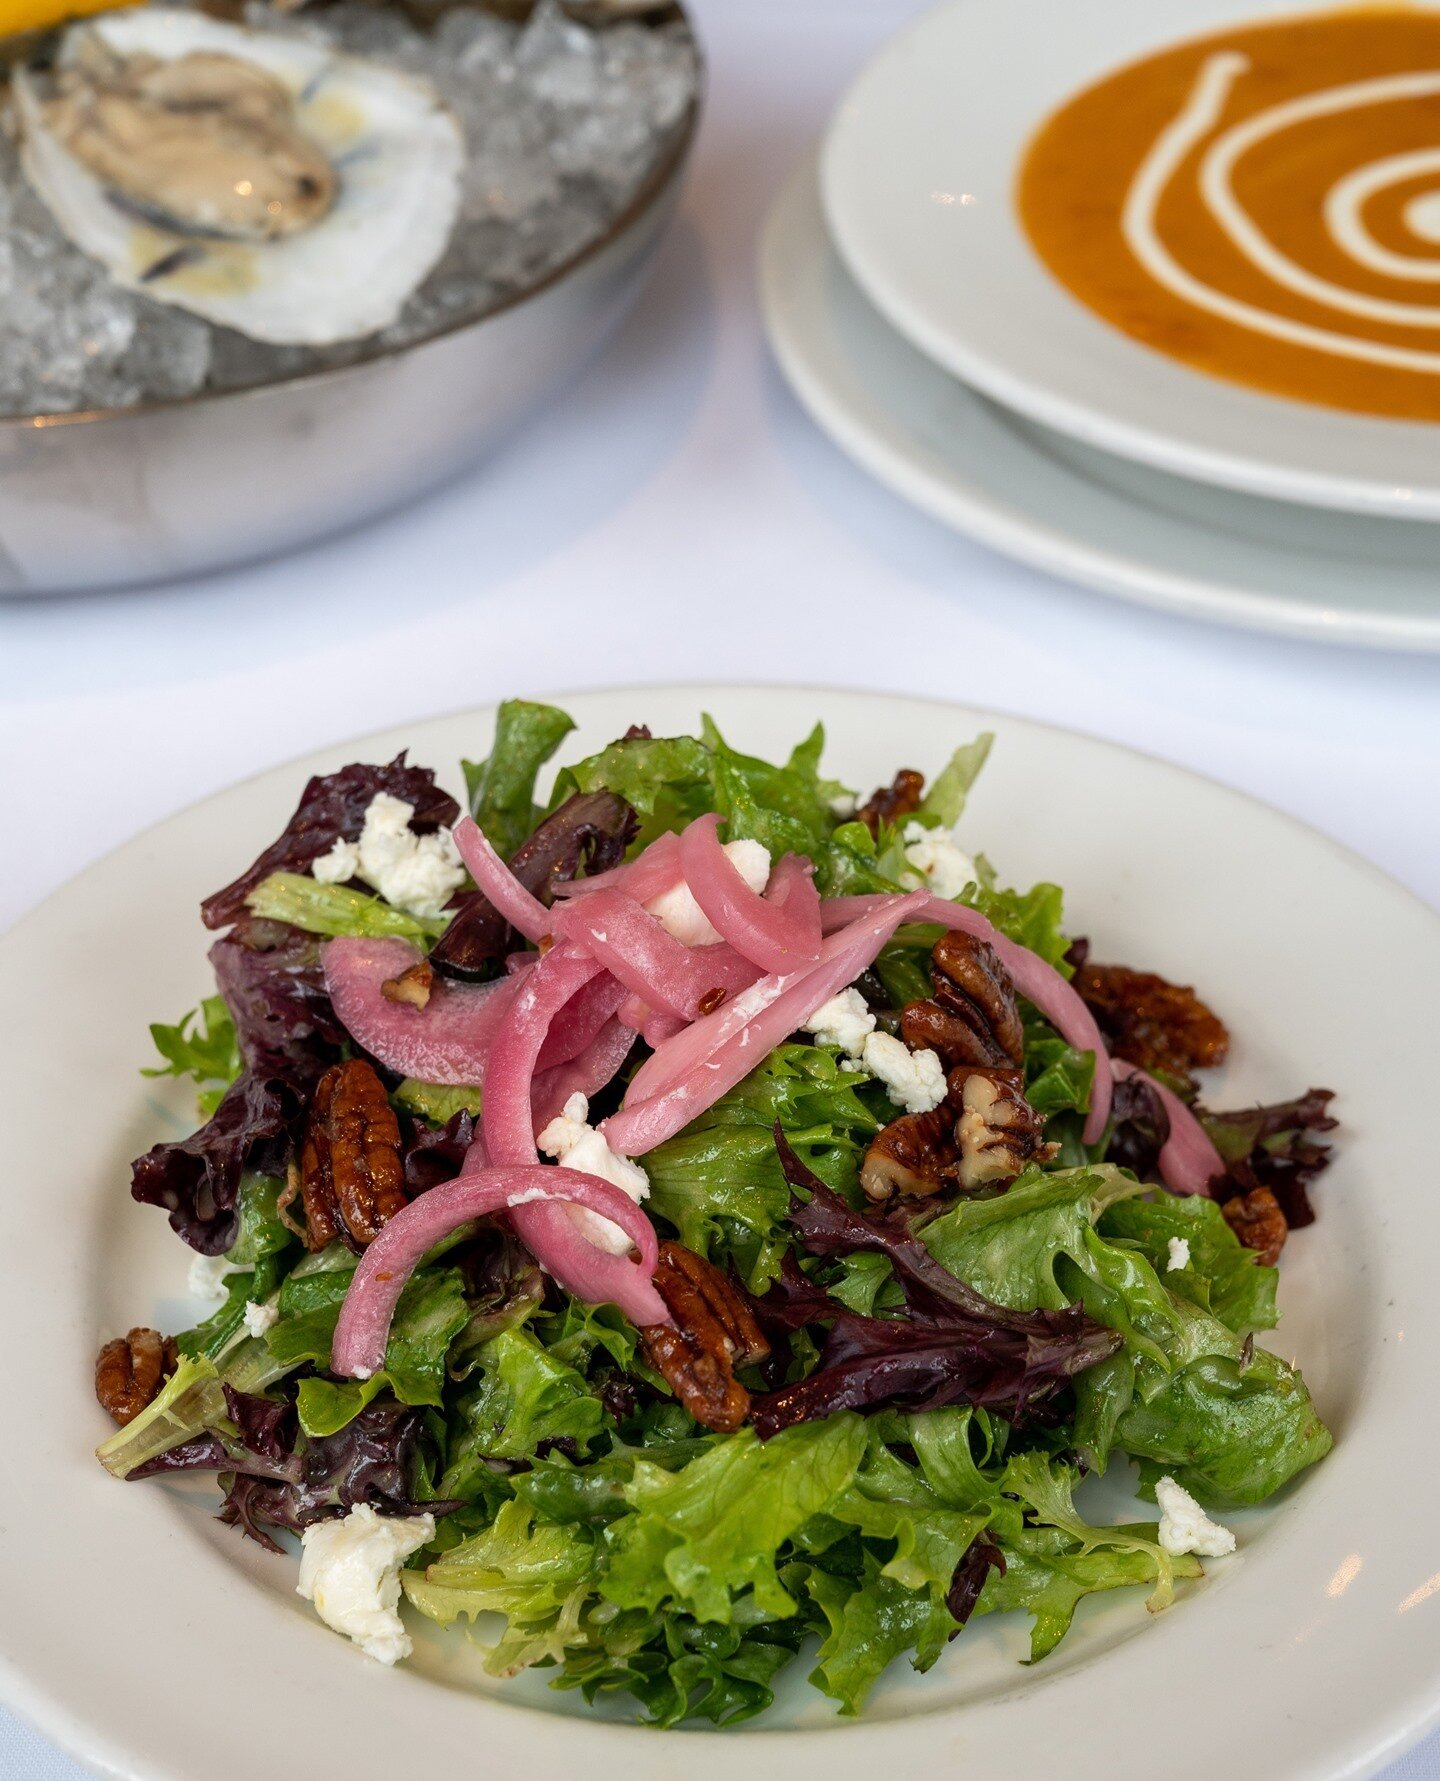 Only a few more days to devour our Restaurant Week menu. 🥗 🥣 🦪⁠
⁠
*Available for dine in or take out.⁠
⁠
#seafood #seafoodporn #seafoodlover #seafoodlove #seafoodlovers #seafoodtime #freshseafood #seafoodresturant #seafoodie #seafoods #clevelandoh